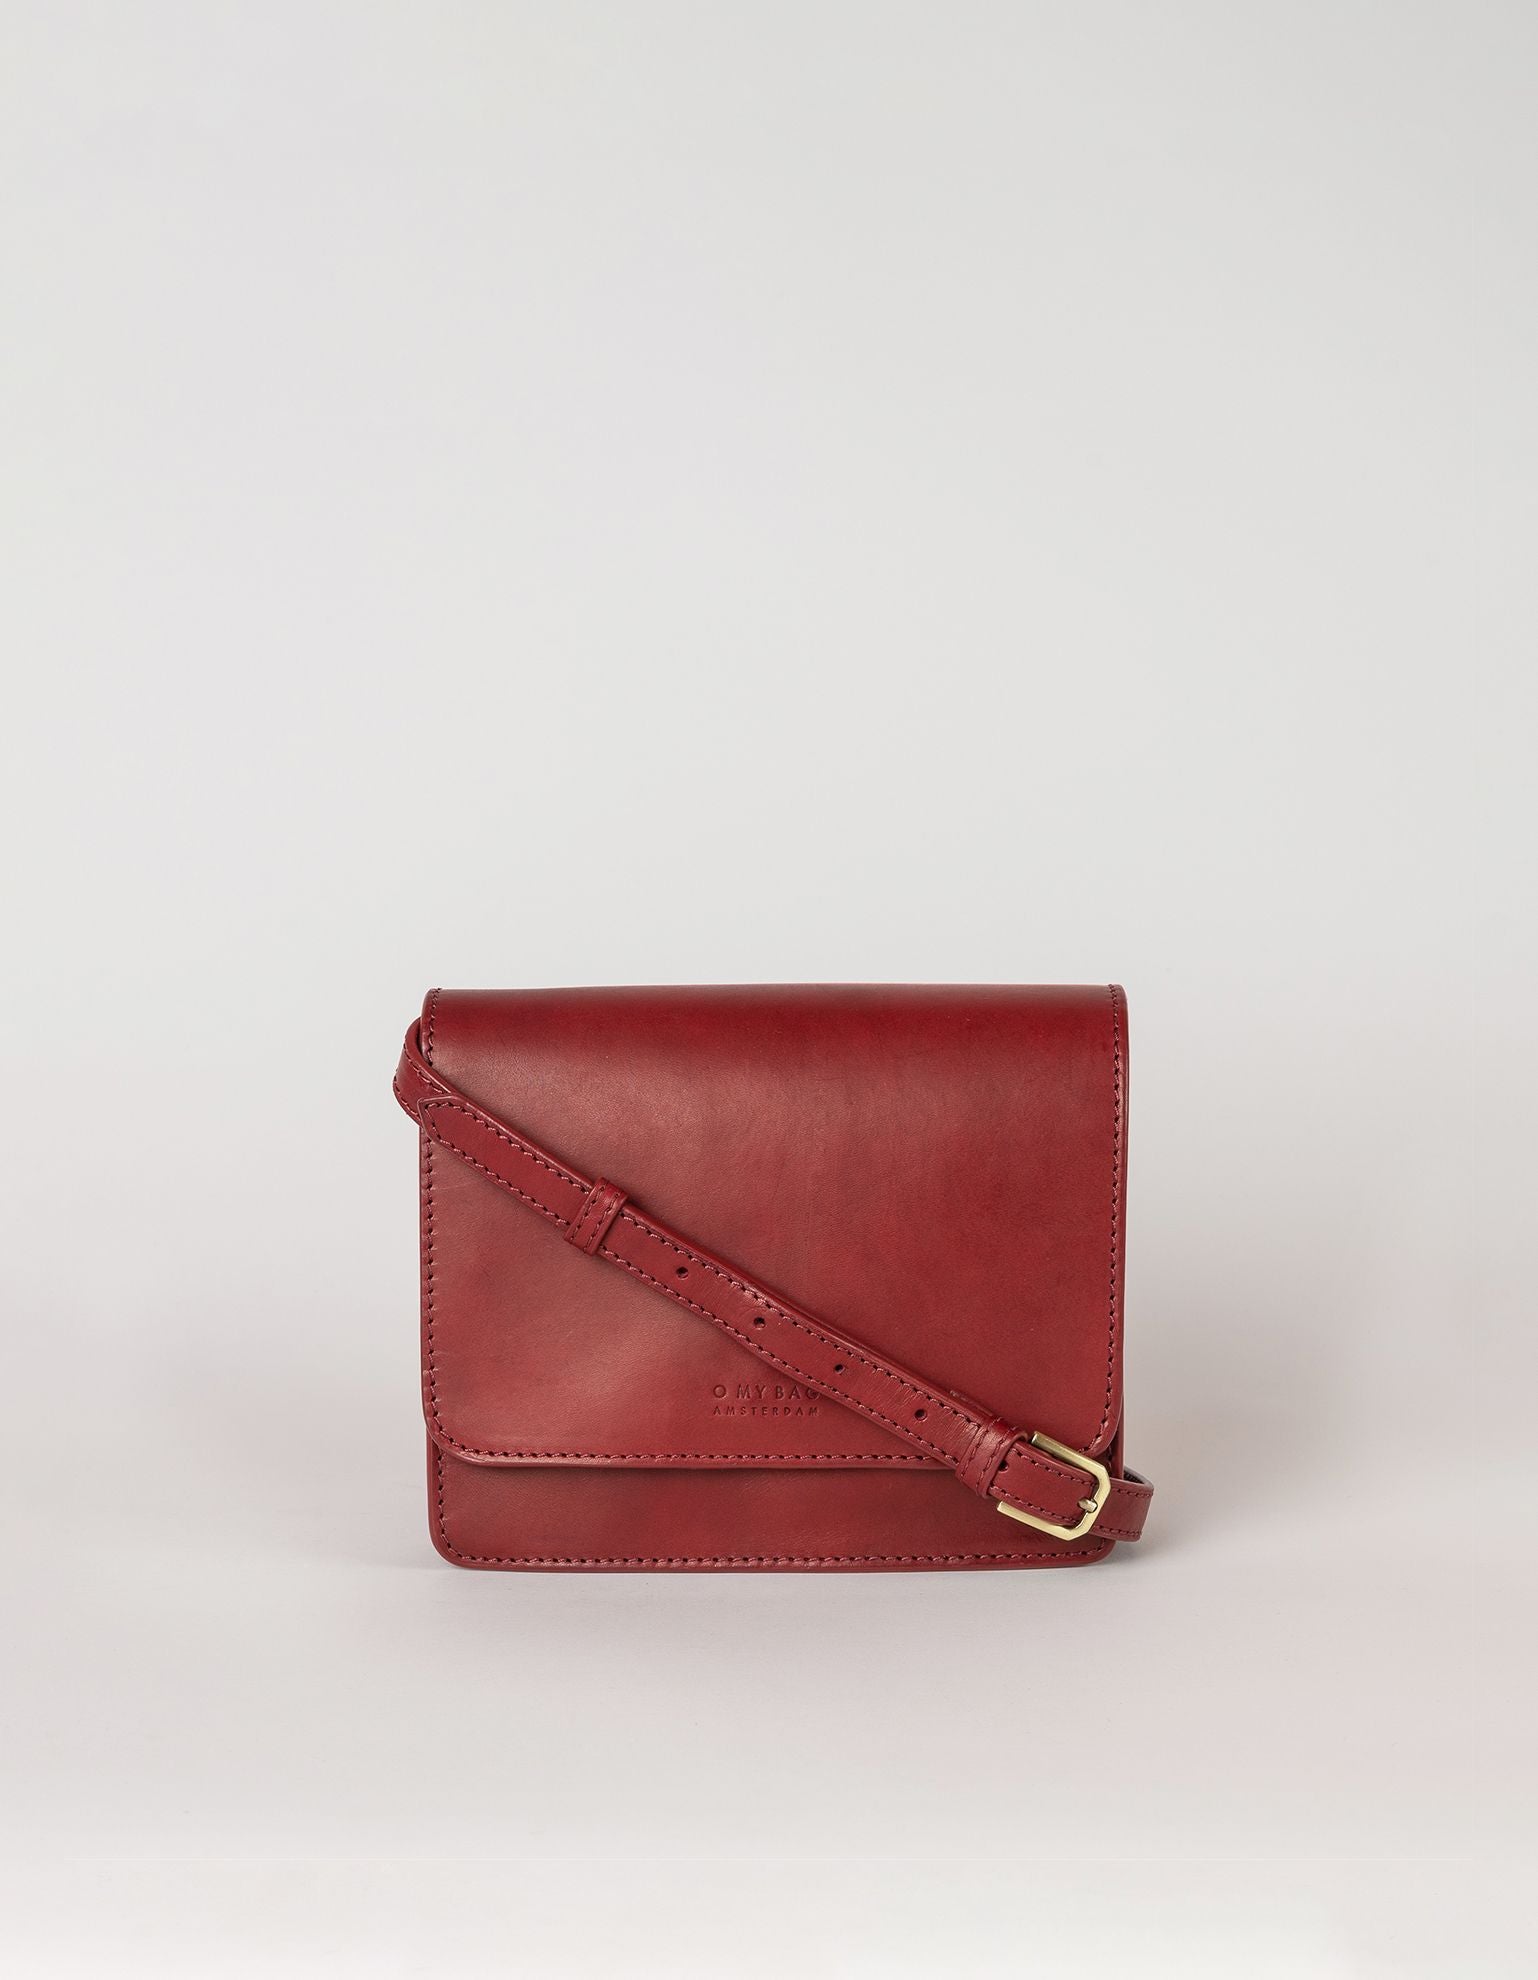 Audrey mini ruby classic leather with full leather strap - front product image